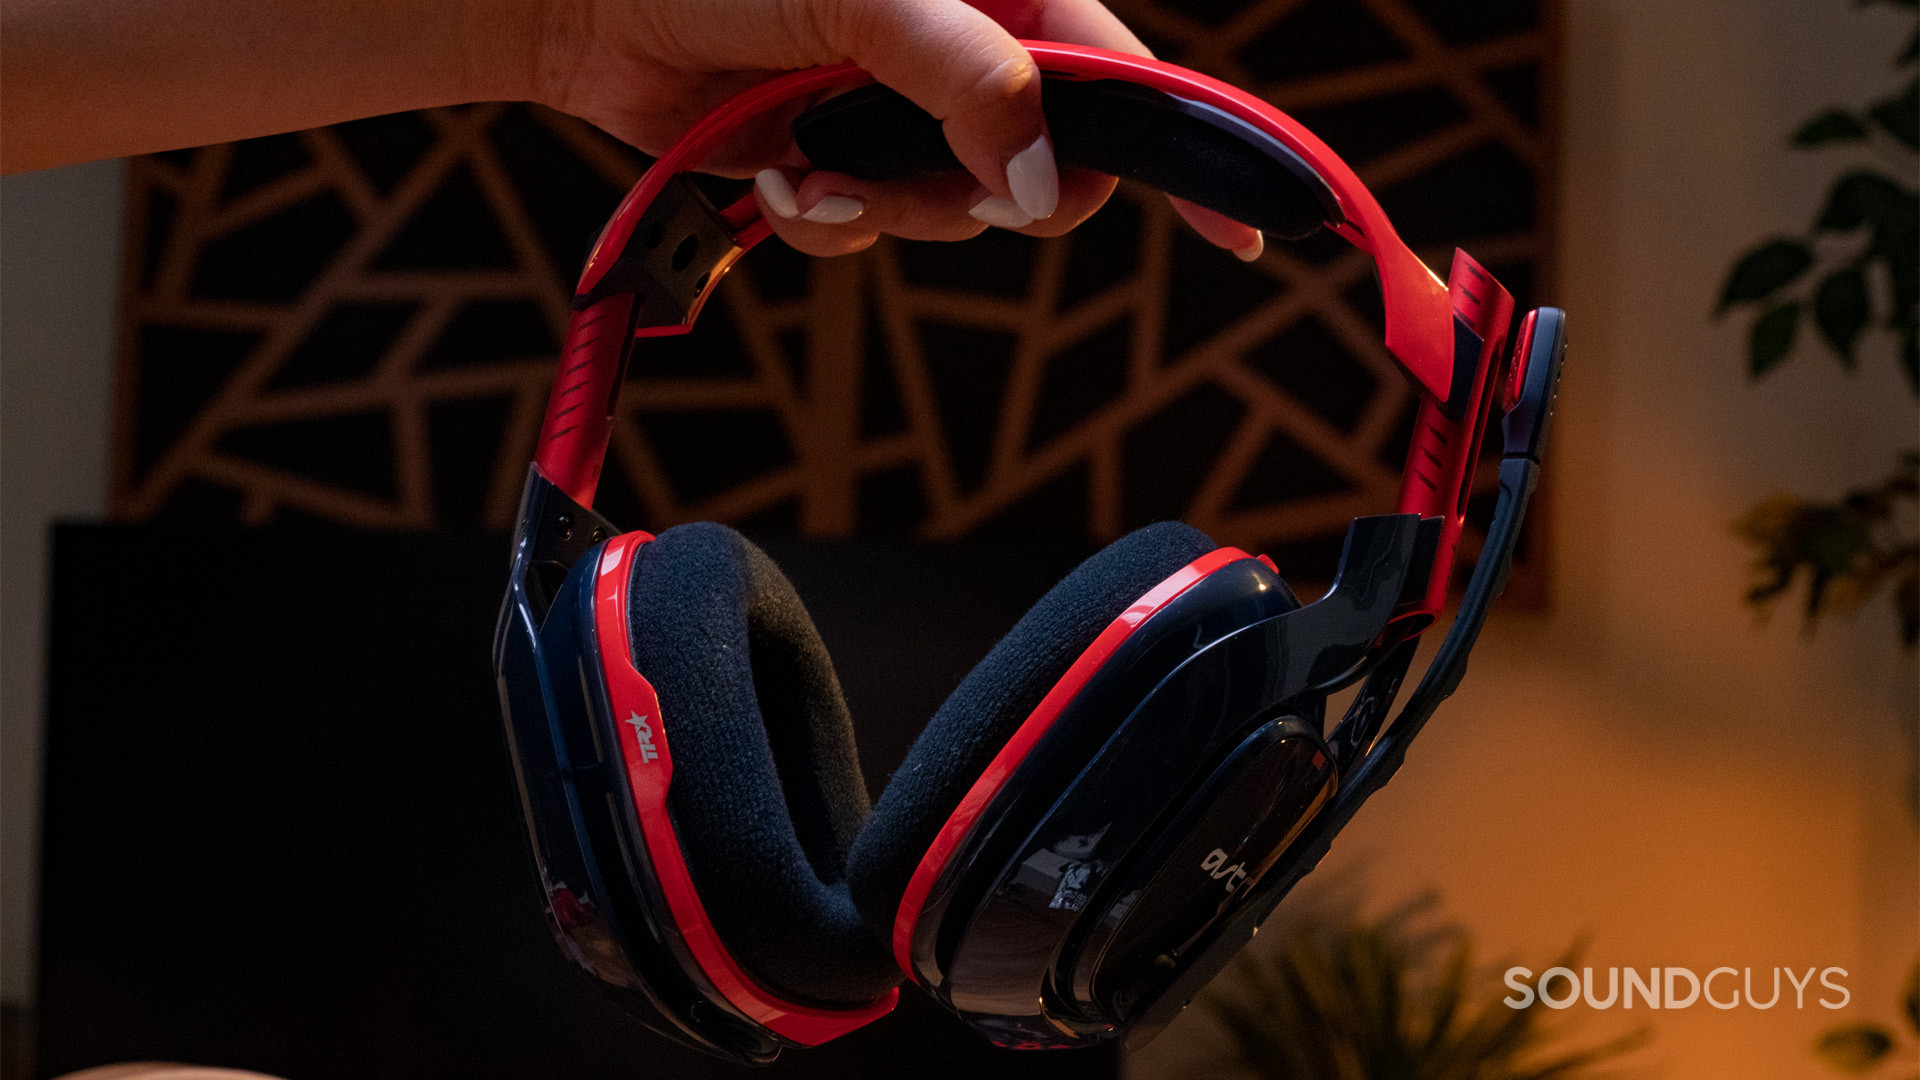 The Astro A40 being held by a single hand.